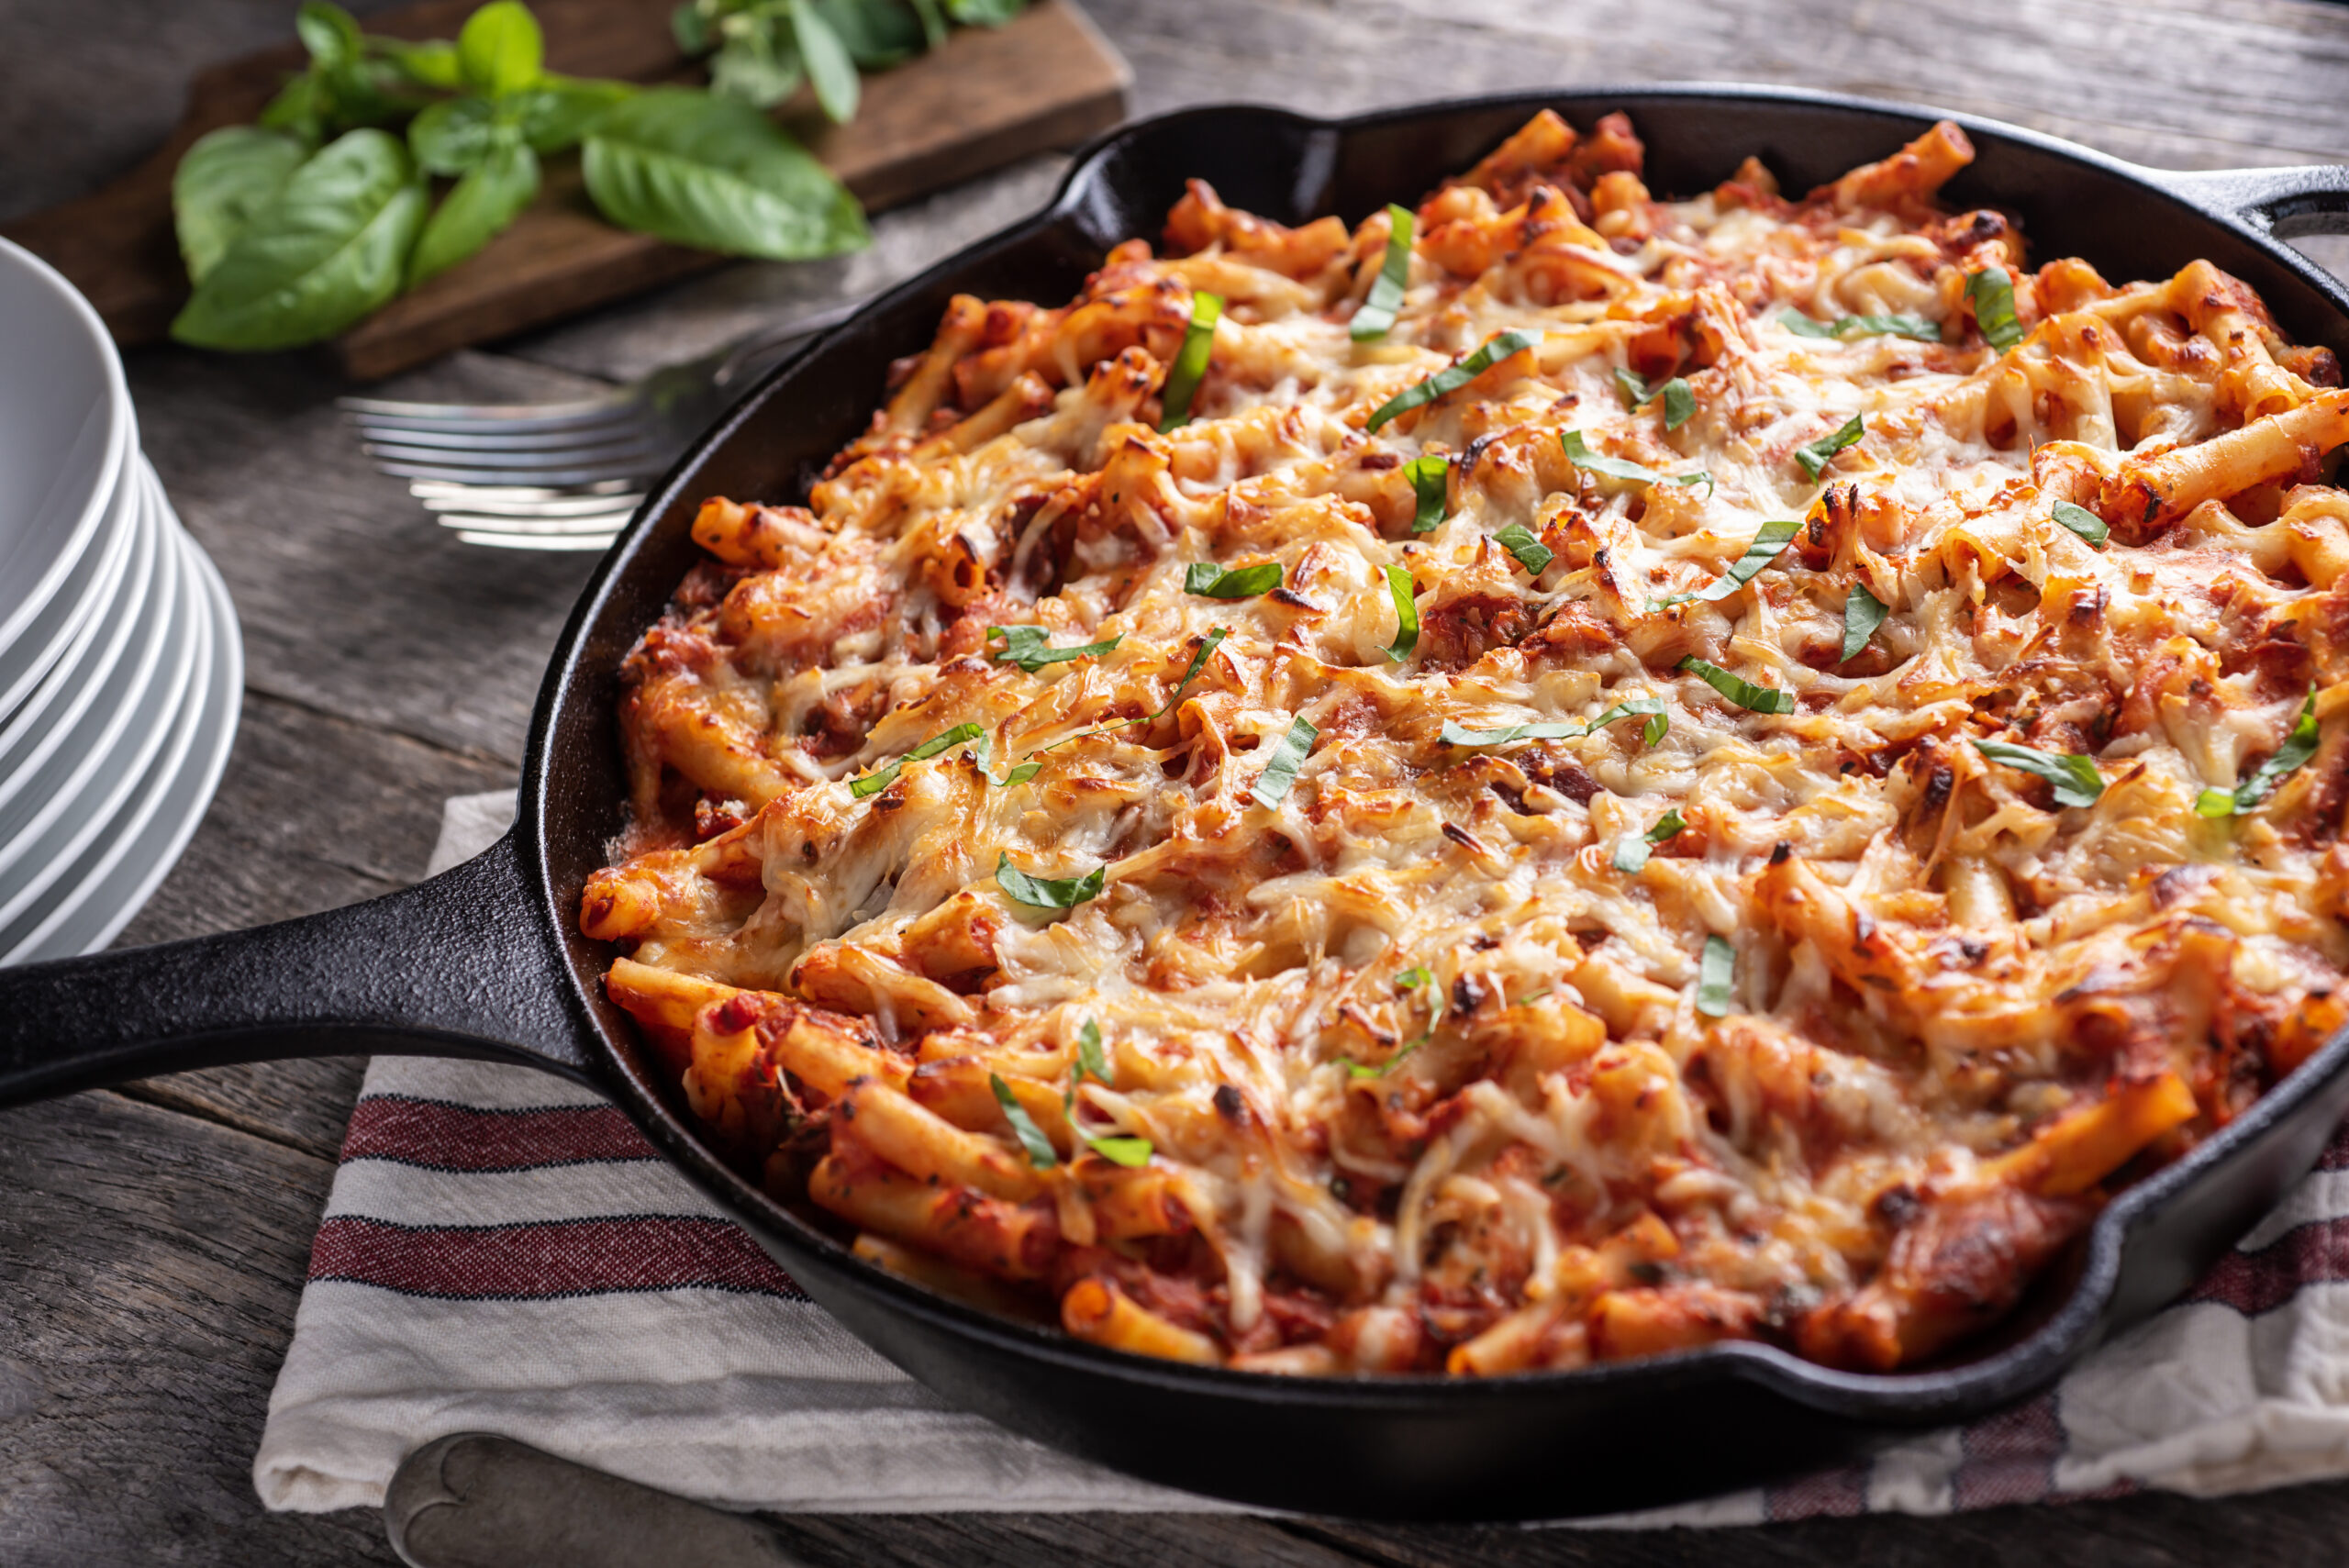 Baked Ziti in a Cast Iron Skillet